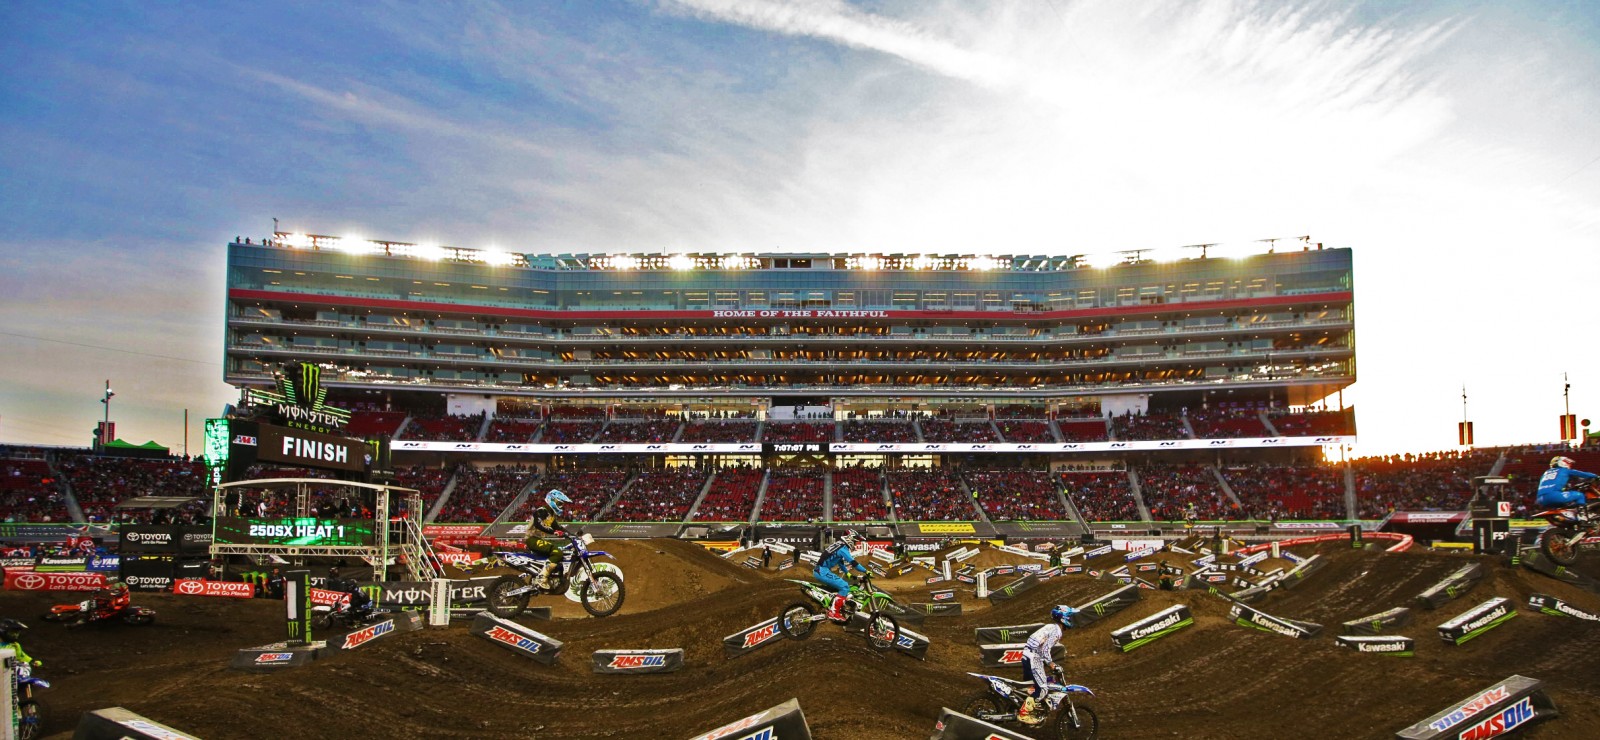 Photos From Supercross and Monster Jam - Levi's® Stadium